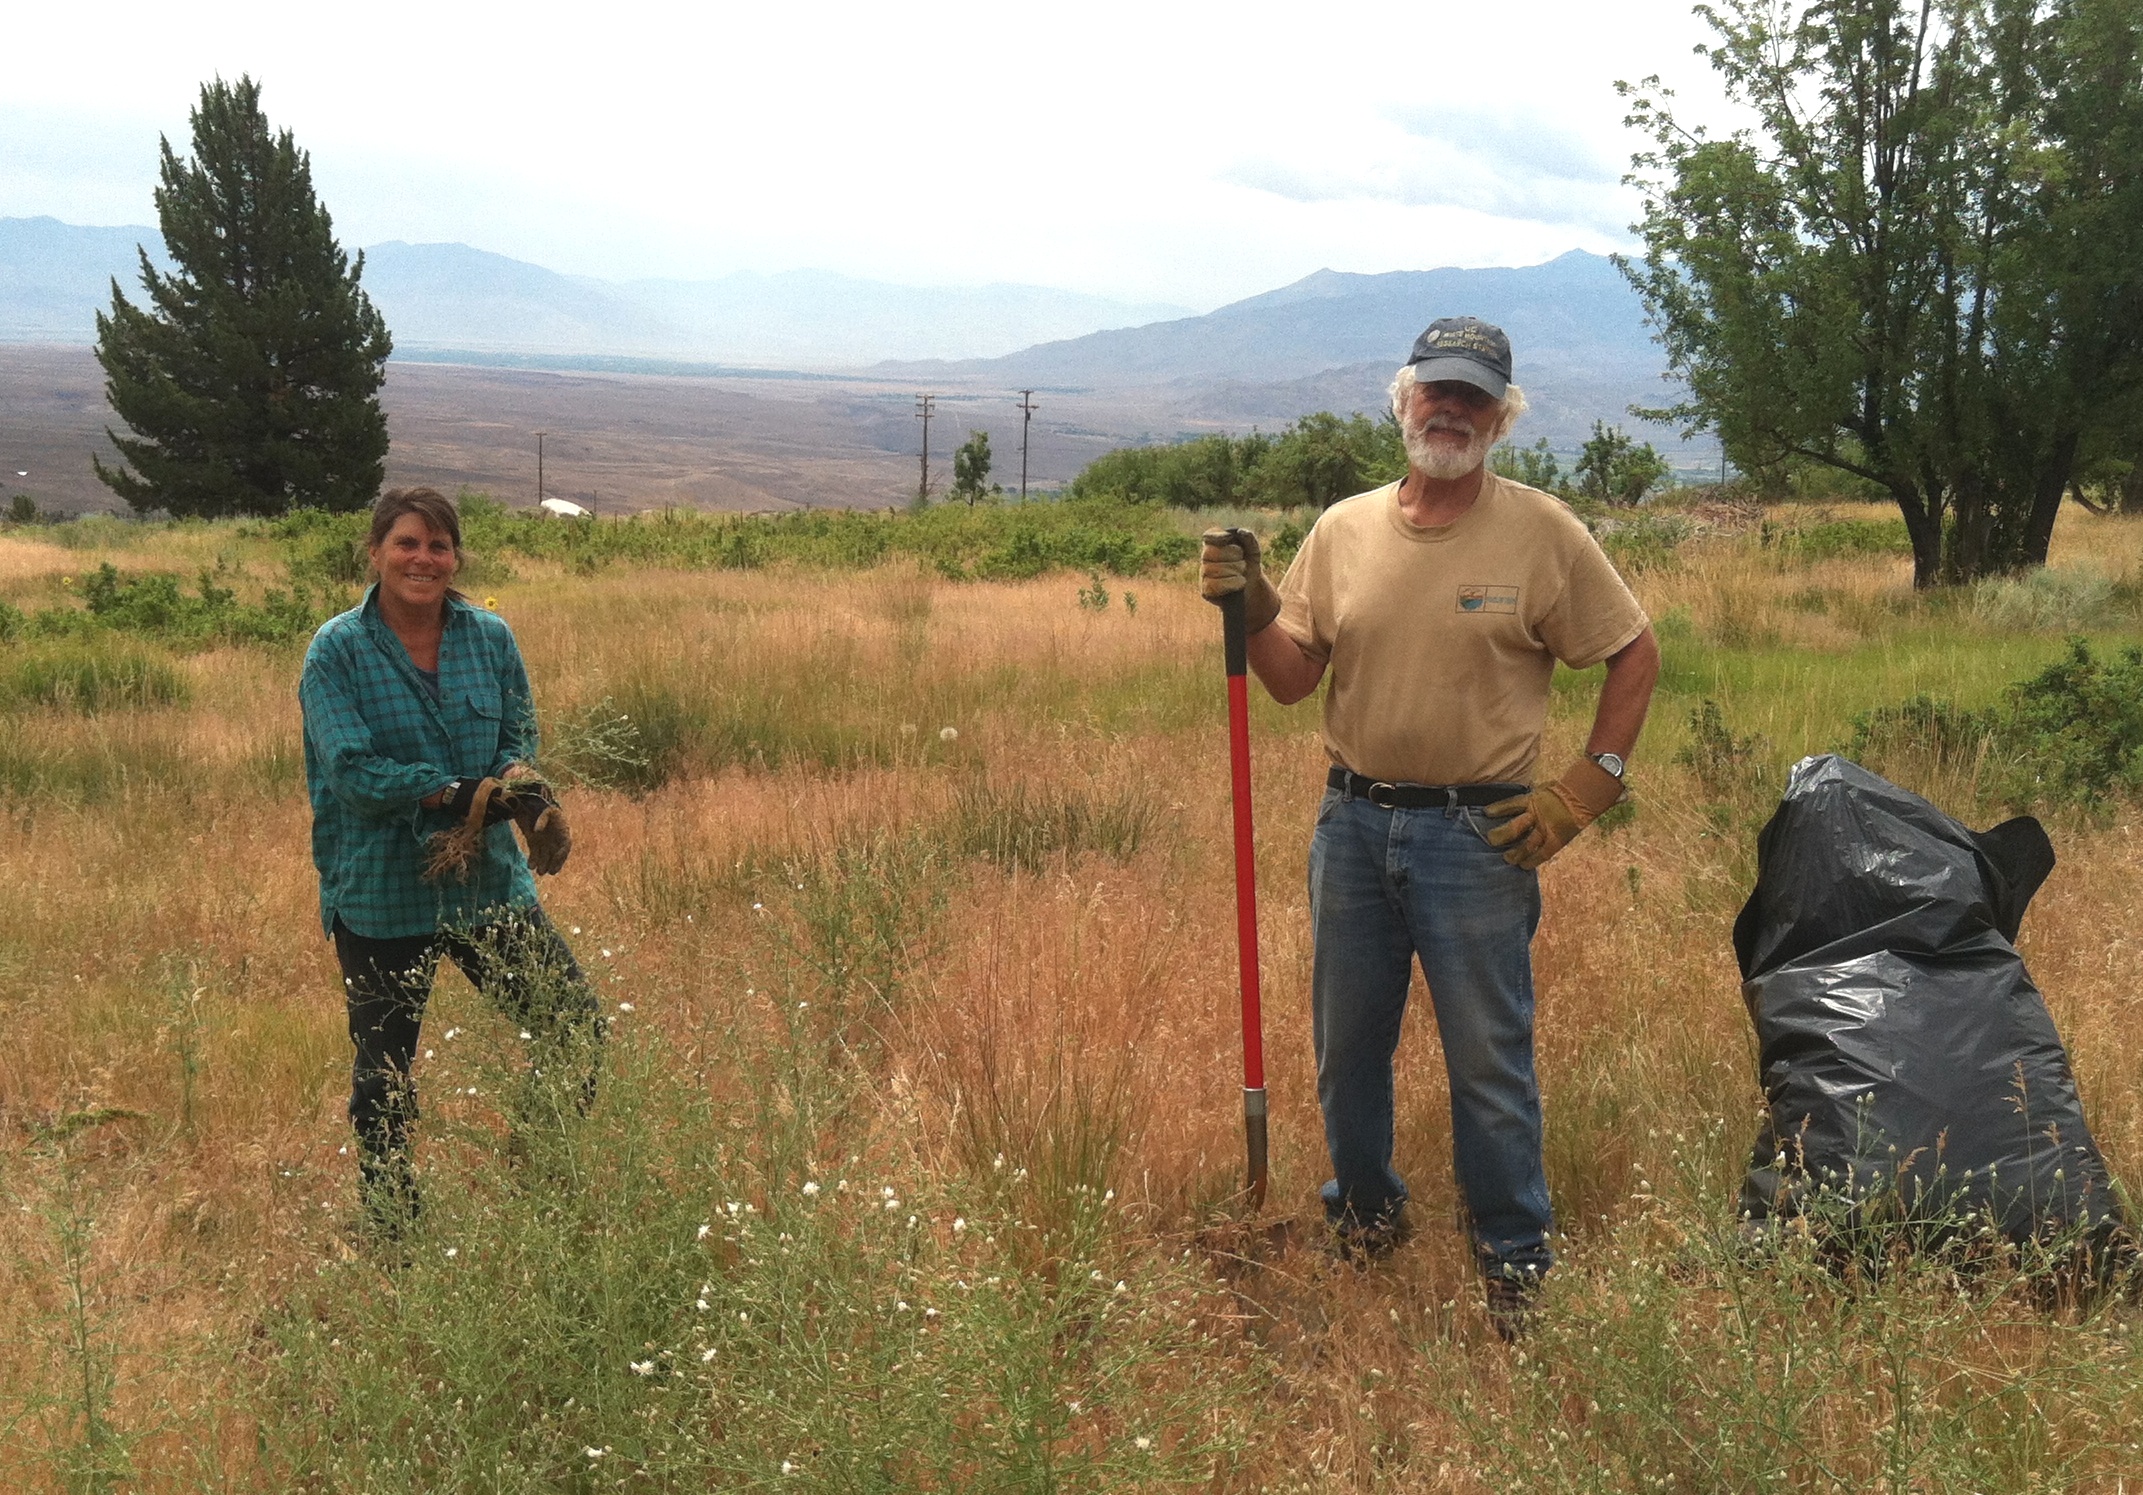 "I love the heavy work of pulling, cutting, and rolling up fences to remove barriers to sage-grouse roaming, especially on such a gorgeous landscape... And a bonus is working with a very delightful group of volunteers." - Wally Woolfenden (right), Stewardship Volunteer with ESLT